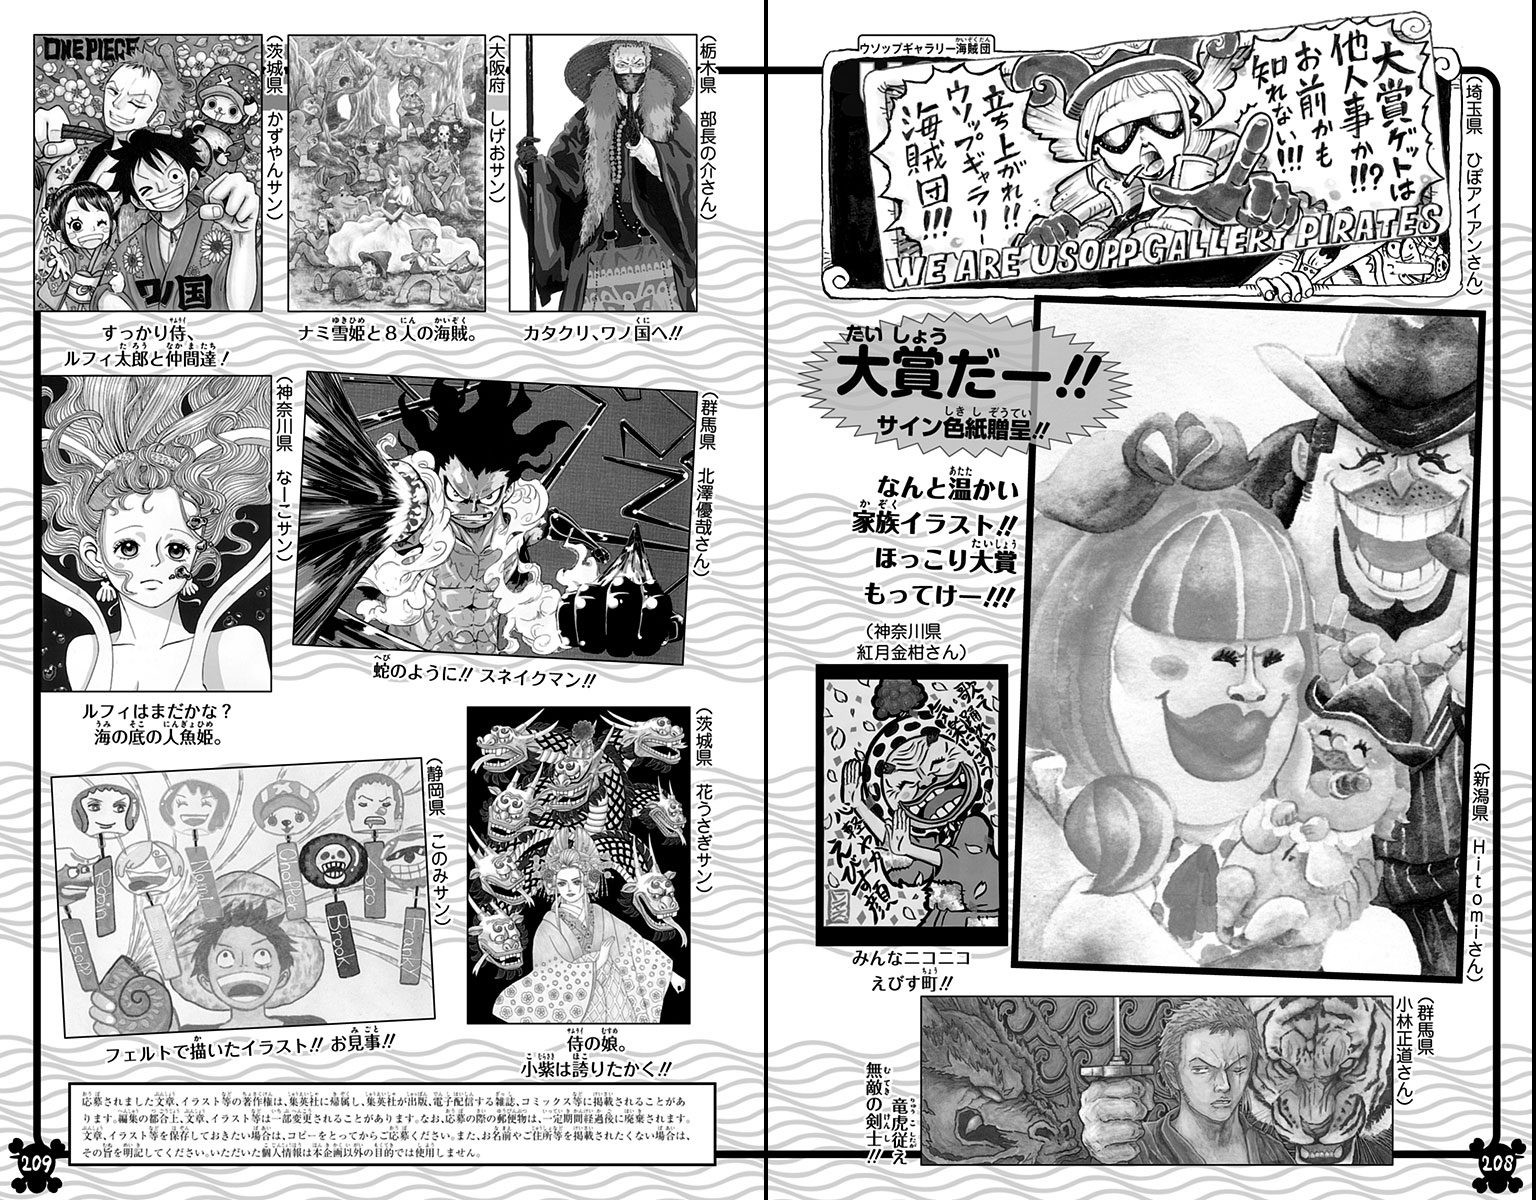 Spoiler - One Piece Chapter 1061 Spoilers Discussion, Page 84